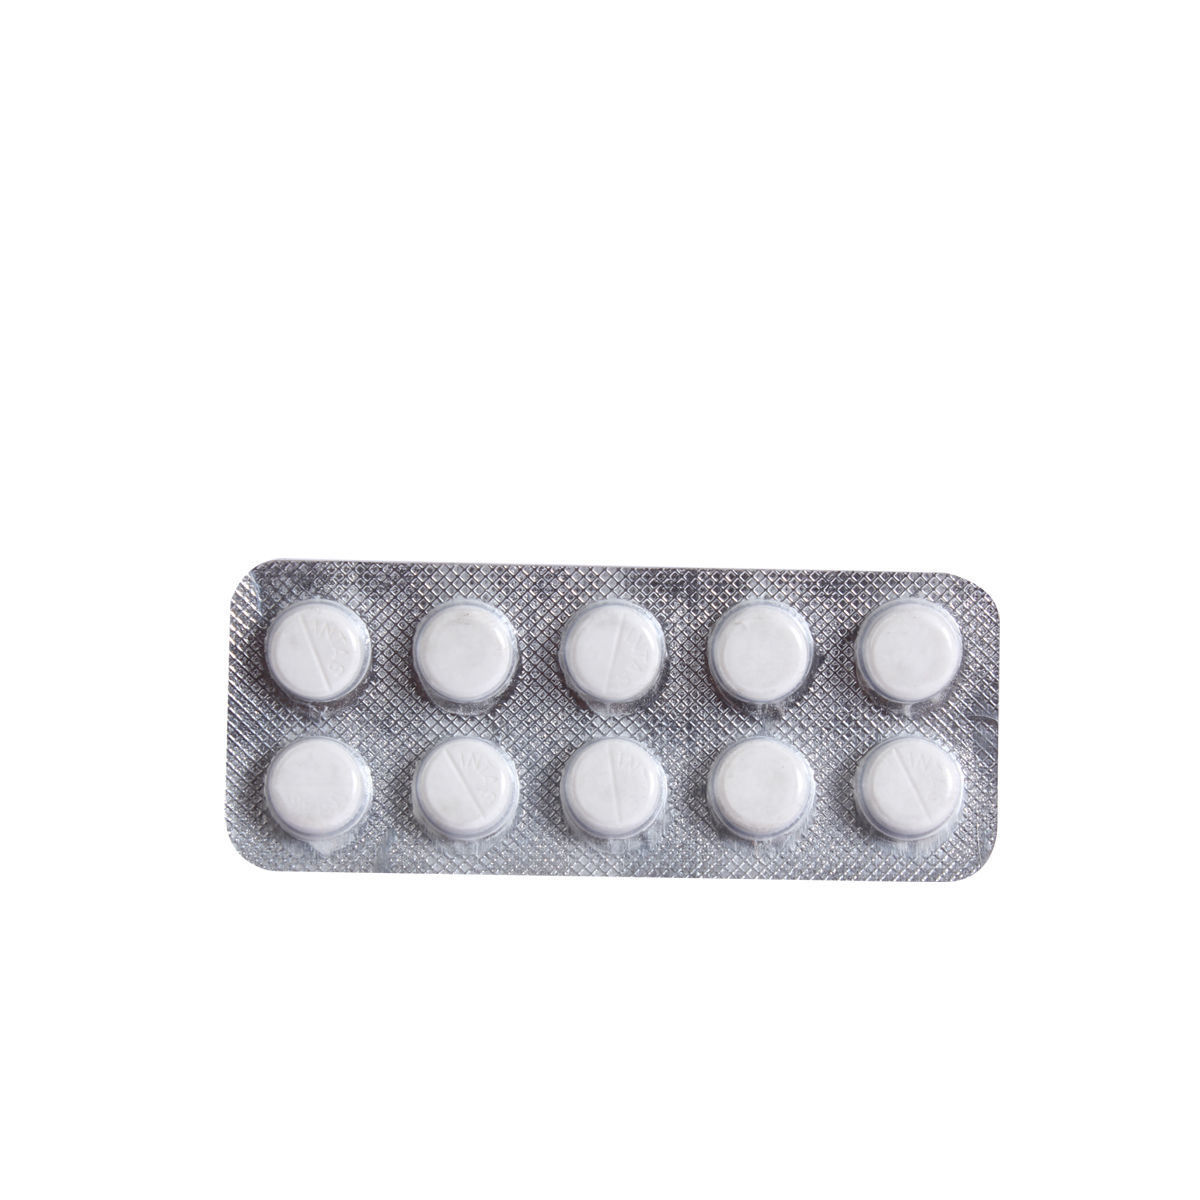 Buy Intalith 300 mg Tablet 10's Online